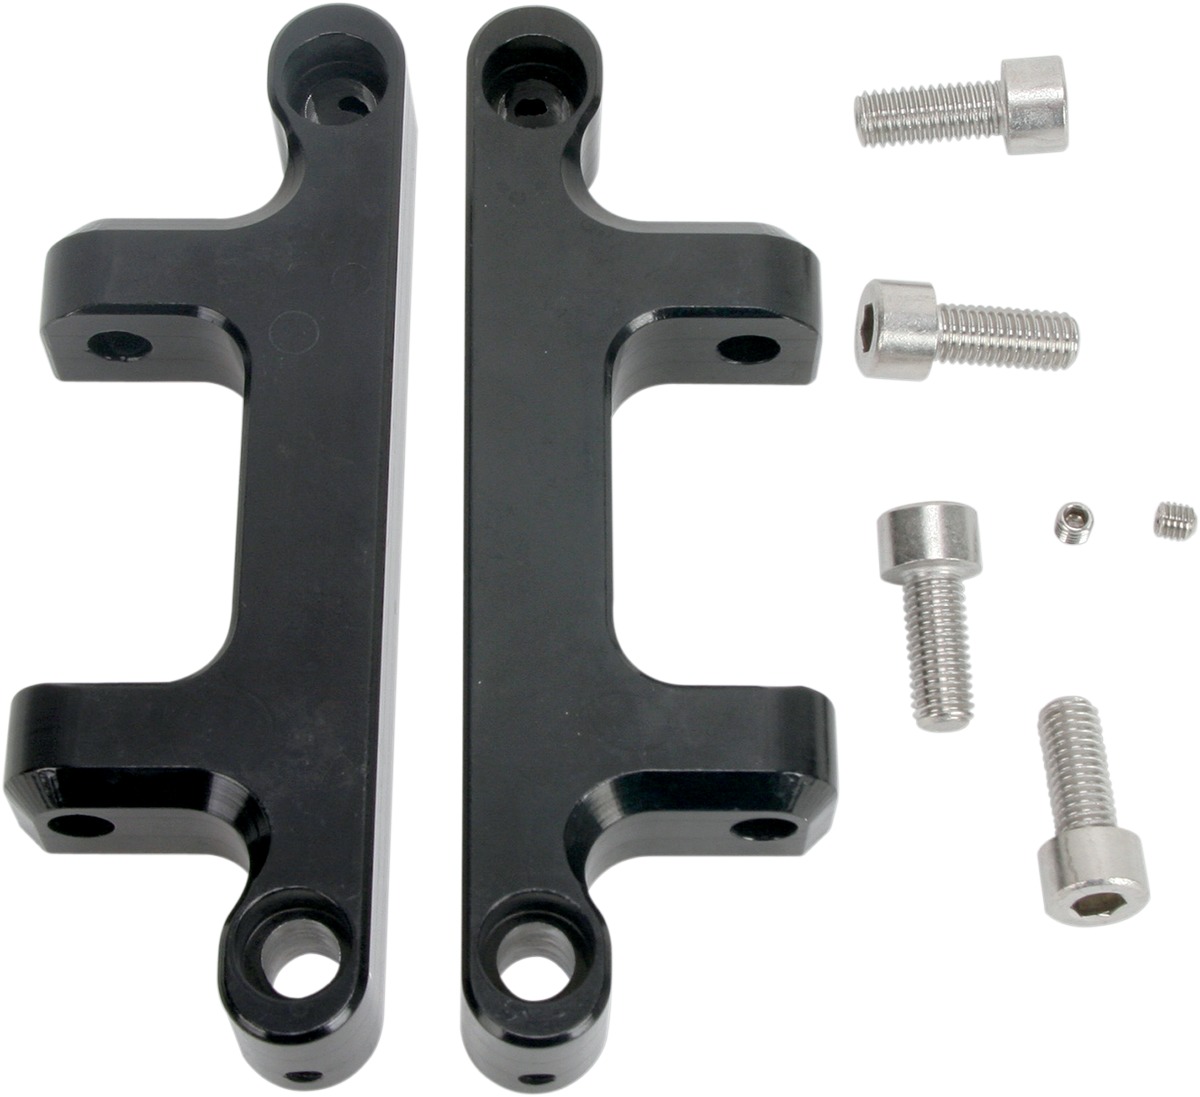 Driver Floorboard Brackets - Black - For 96-16 Yamaha XV - Click Image to Close